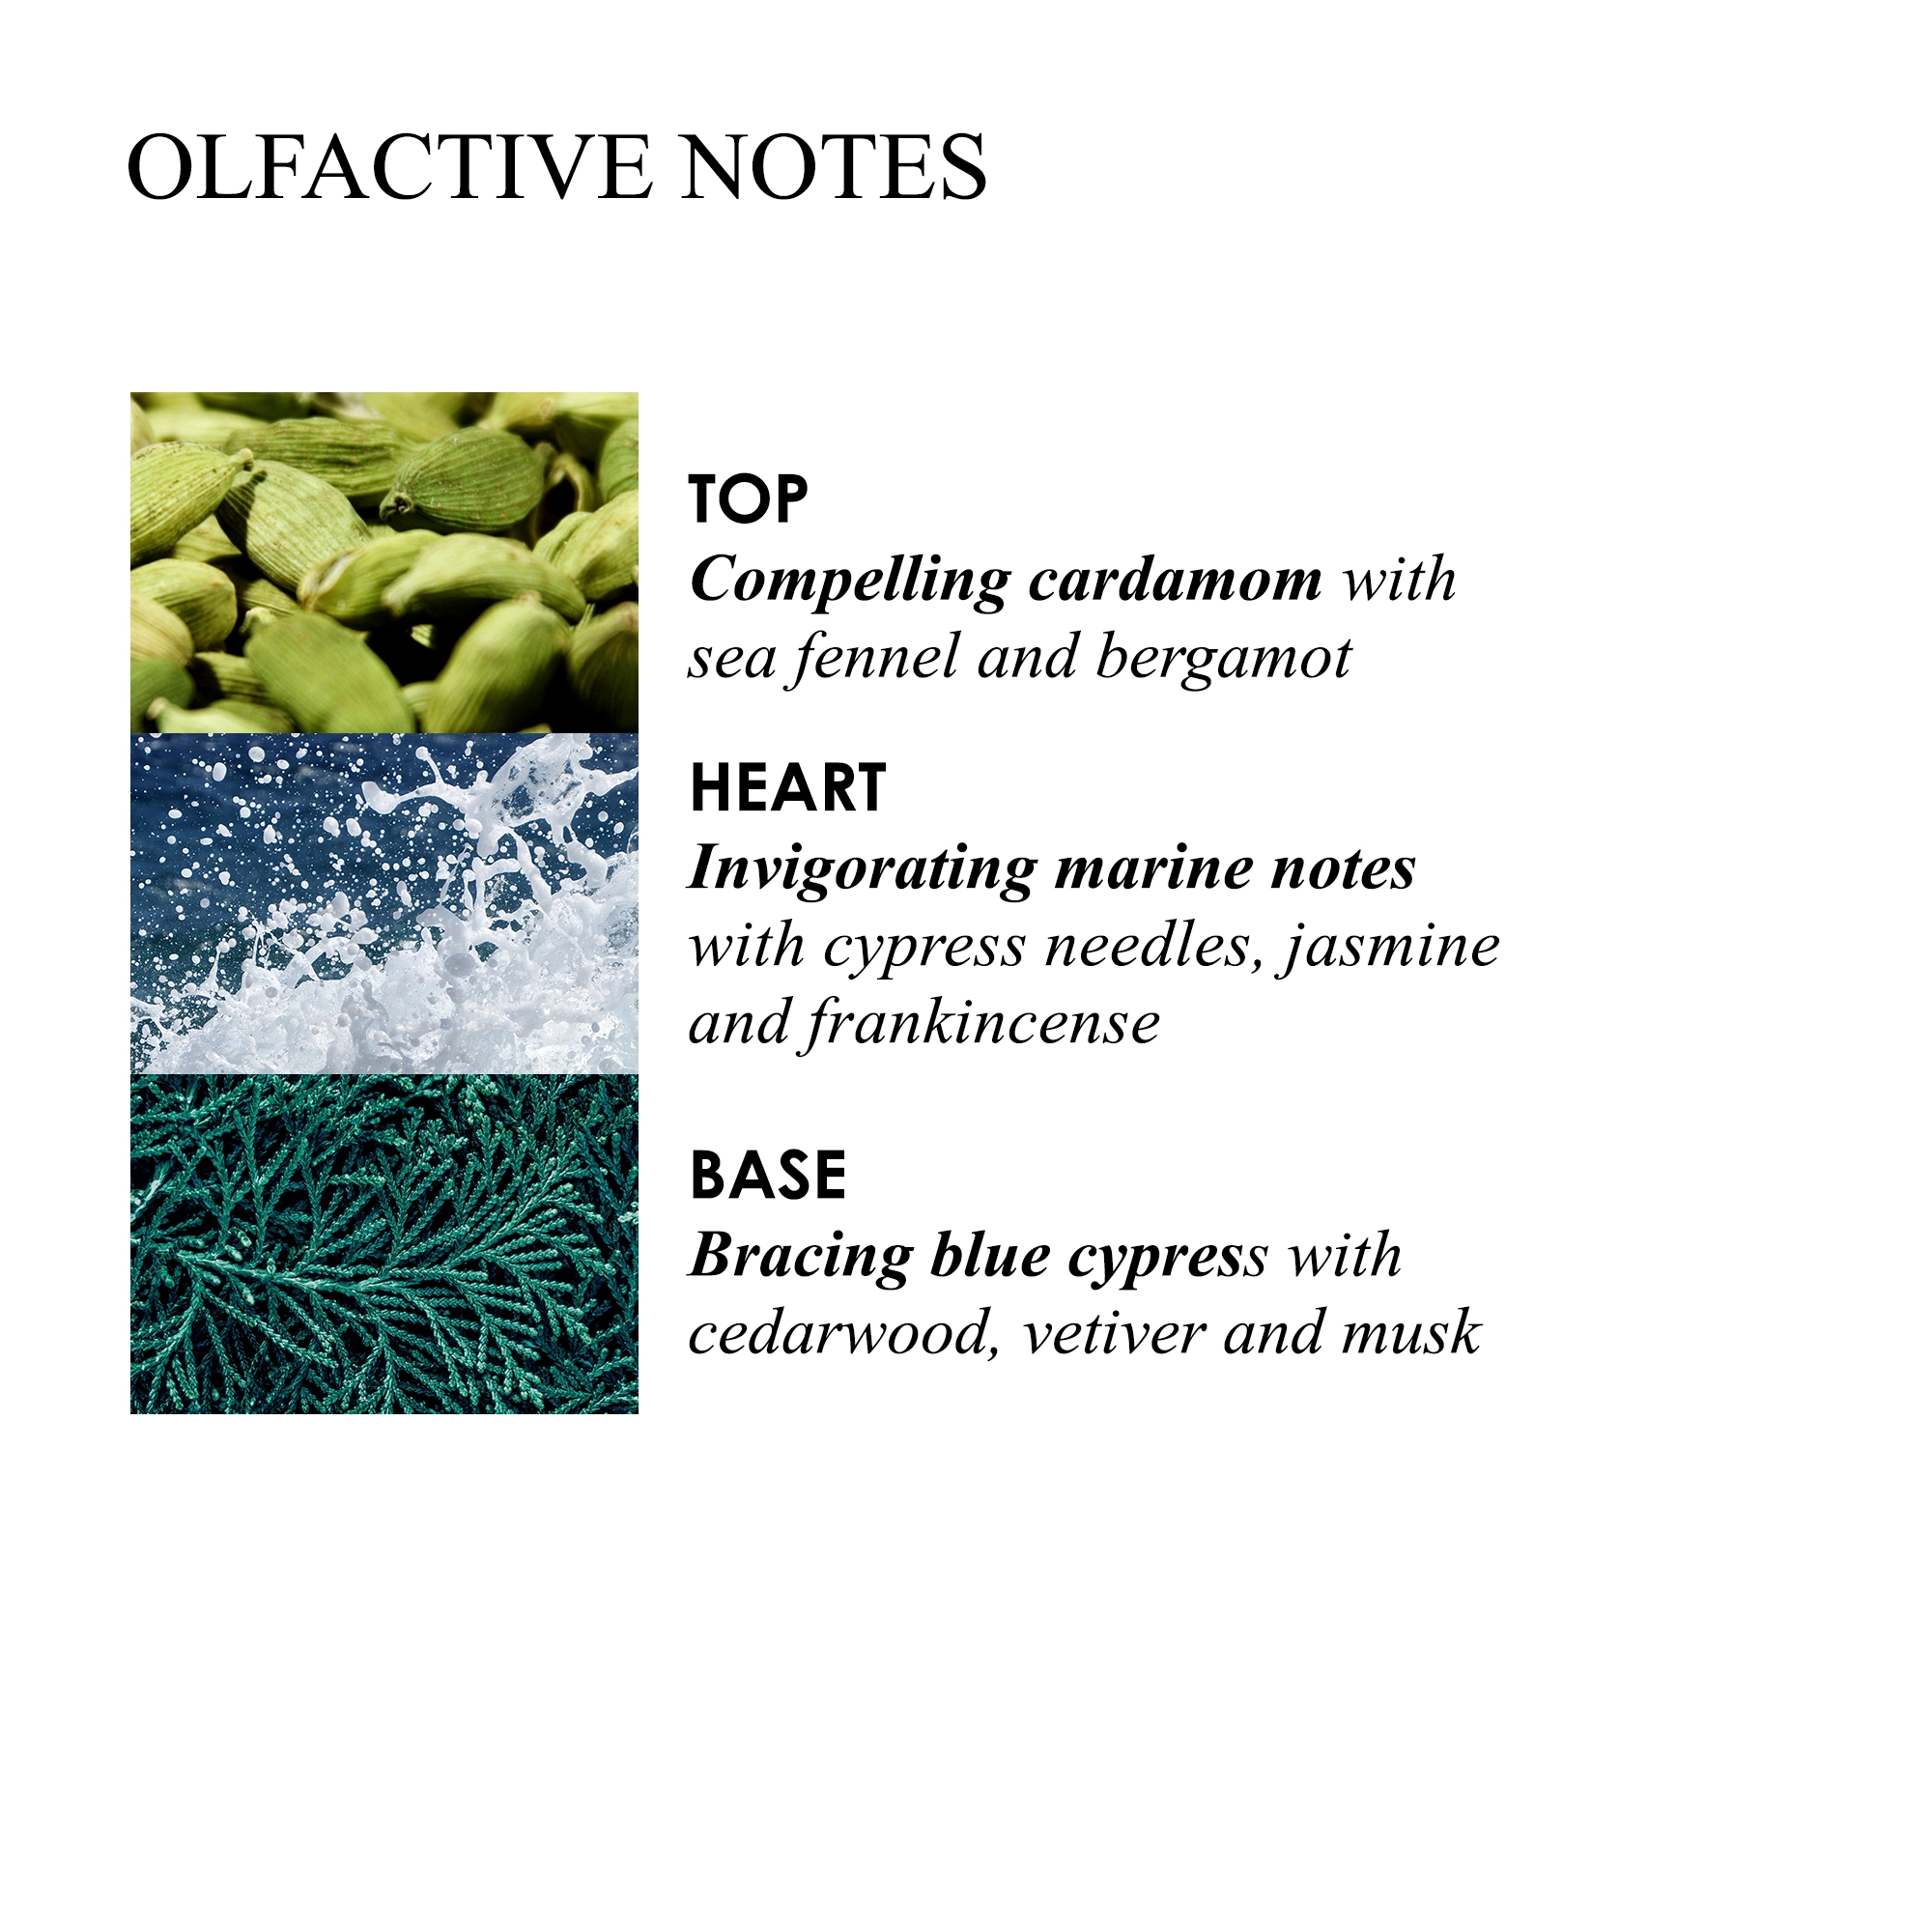 OLFACTIVE NOTES

              TOP
              Compelling cardamom with sea fennel and bergamot

              HEART
              Invigorating marine notes with cypress needles, jasmine and frankincense

              BASE
              Bracing blue cypress with cedarwood, vetiver and musk